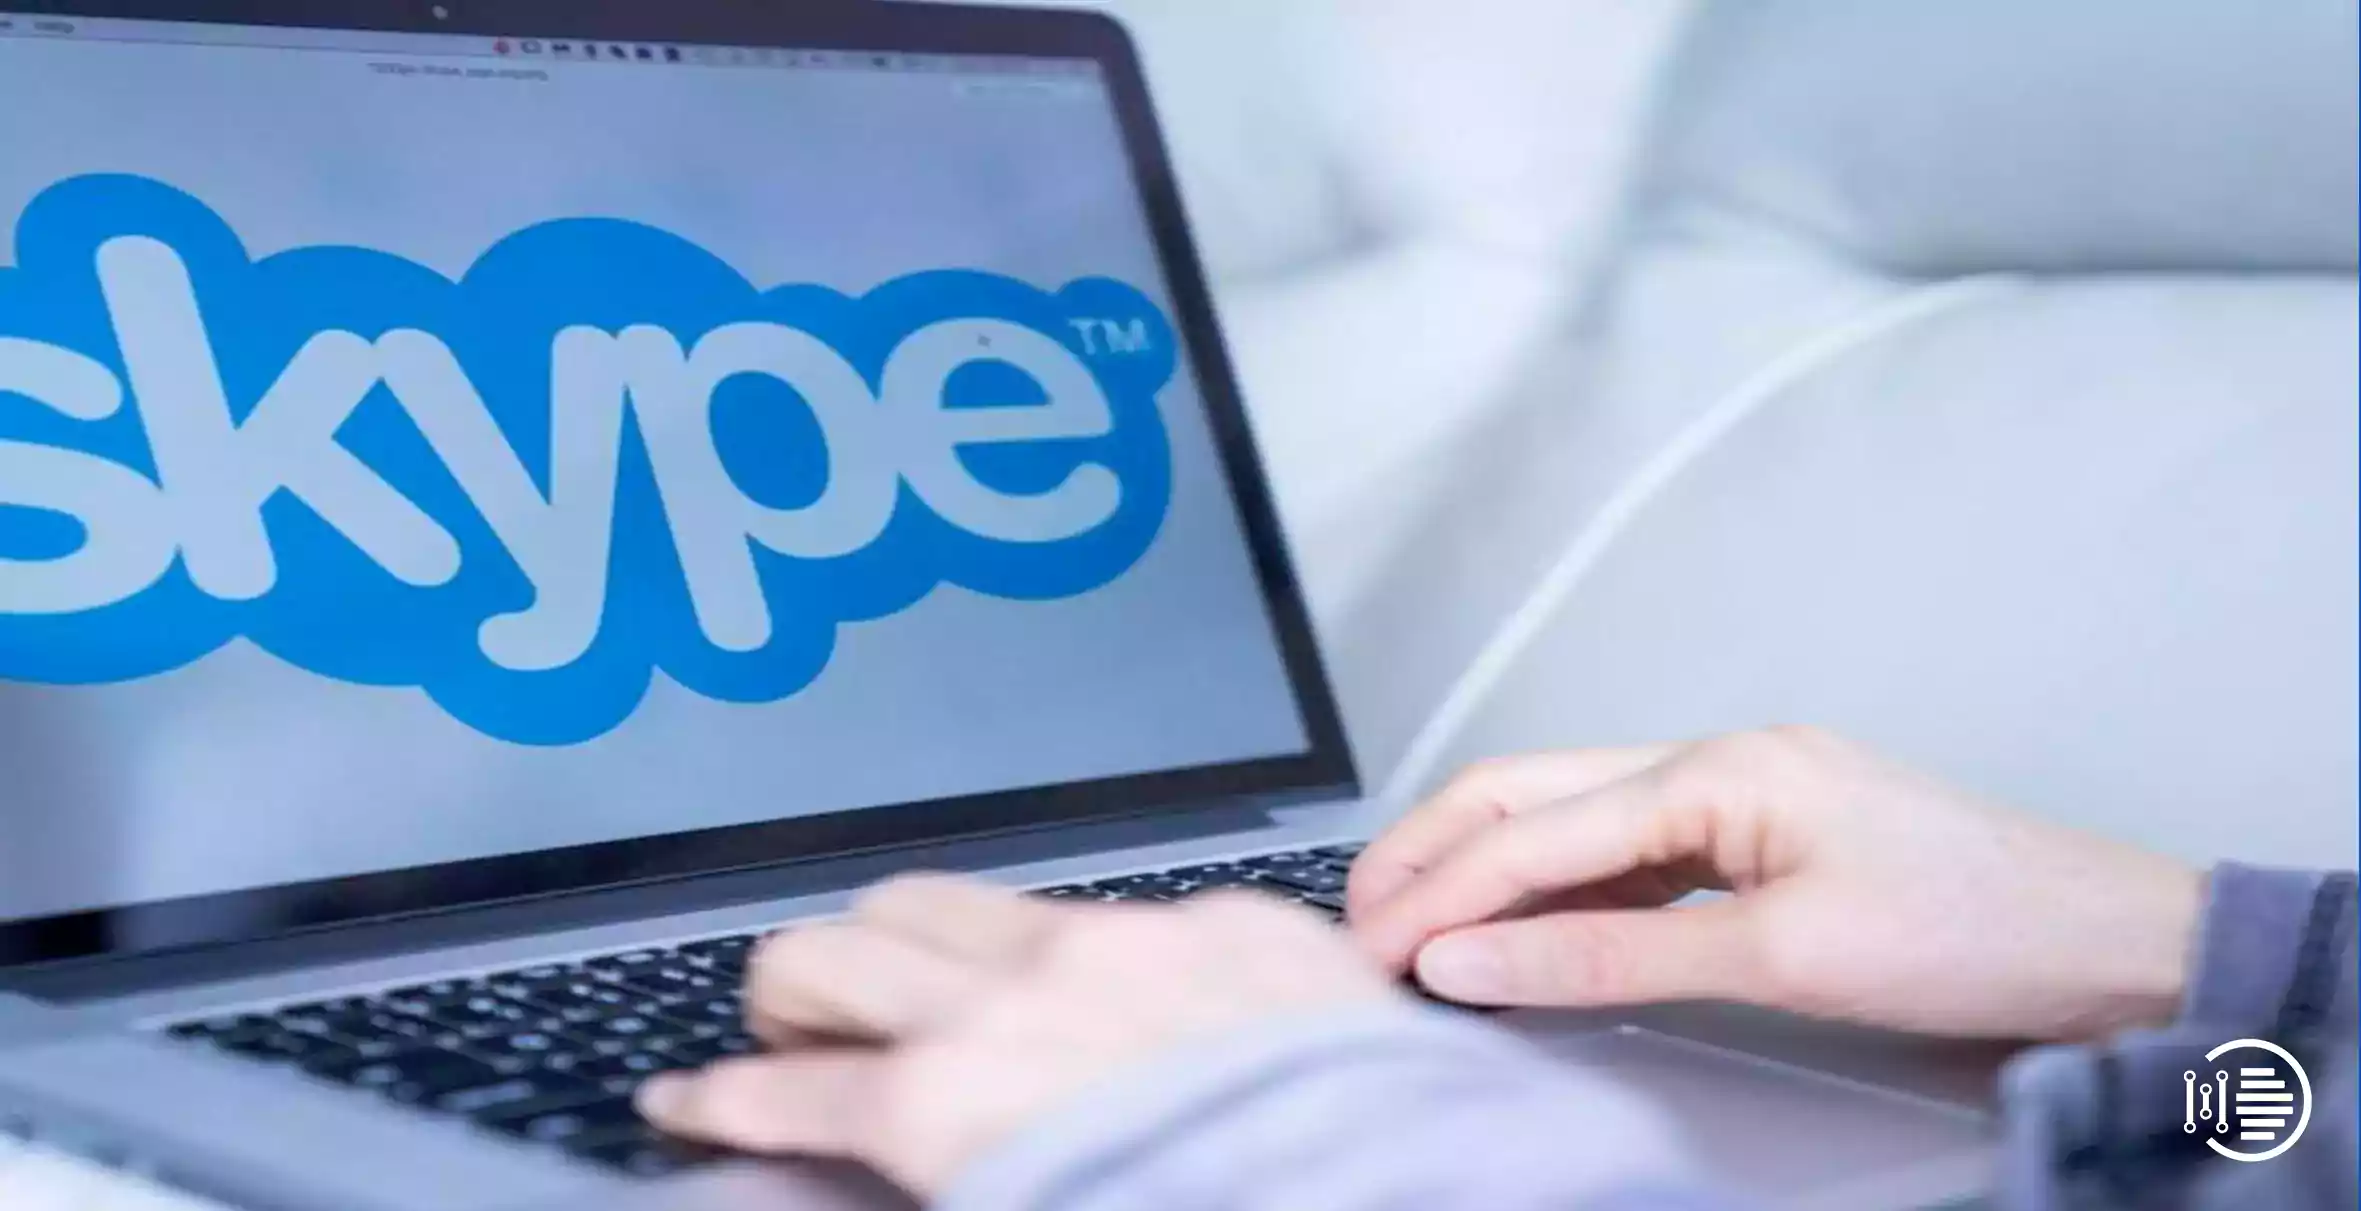 How to easily block Skype on router in 2021 - India Techno Blog